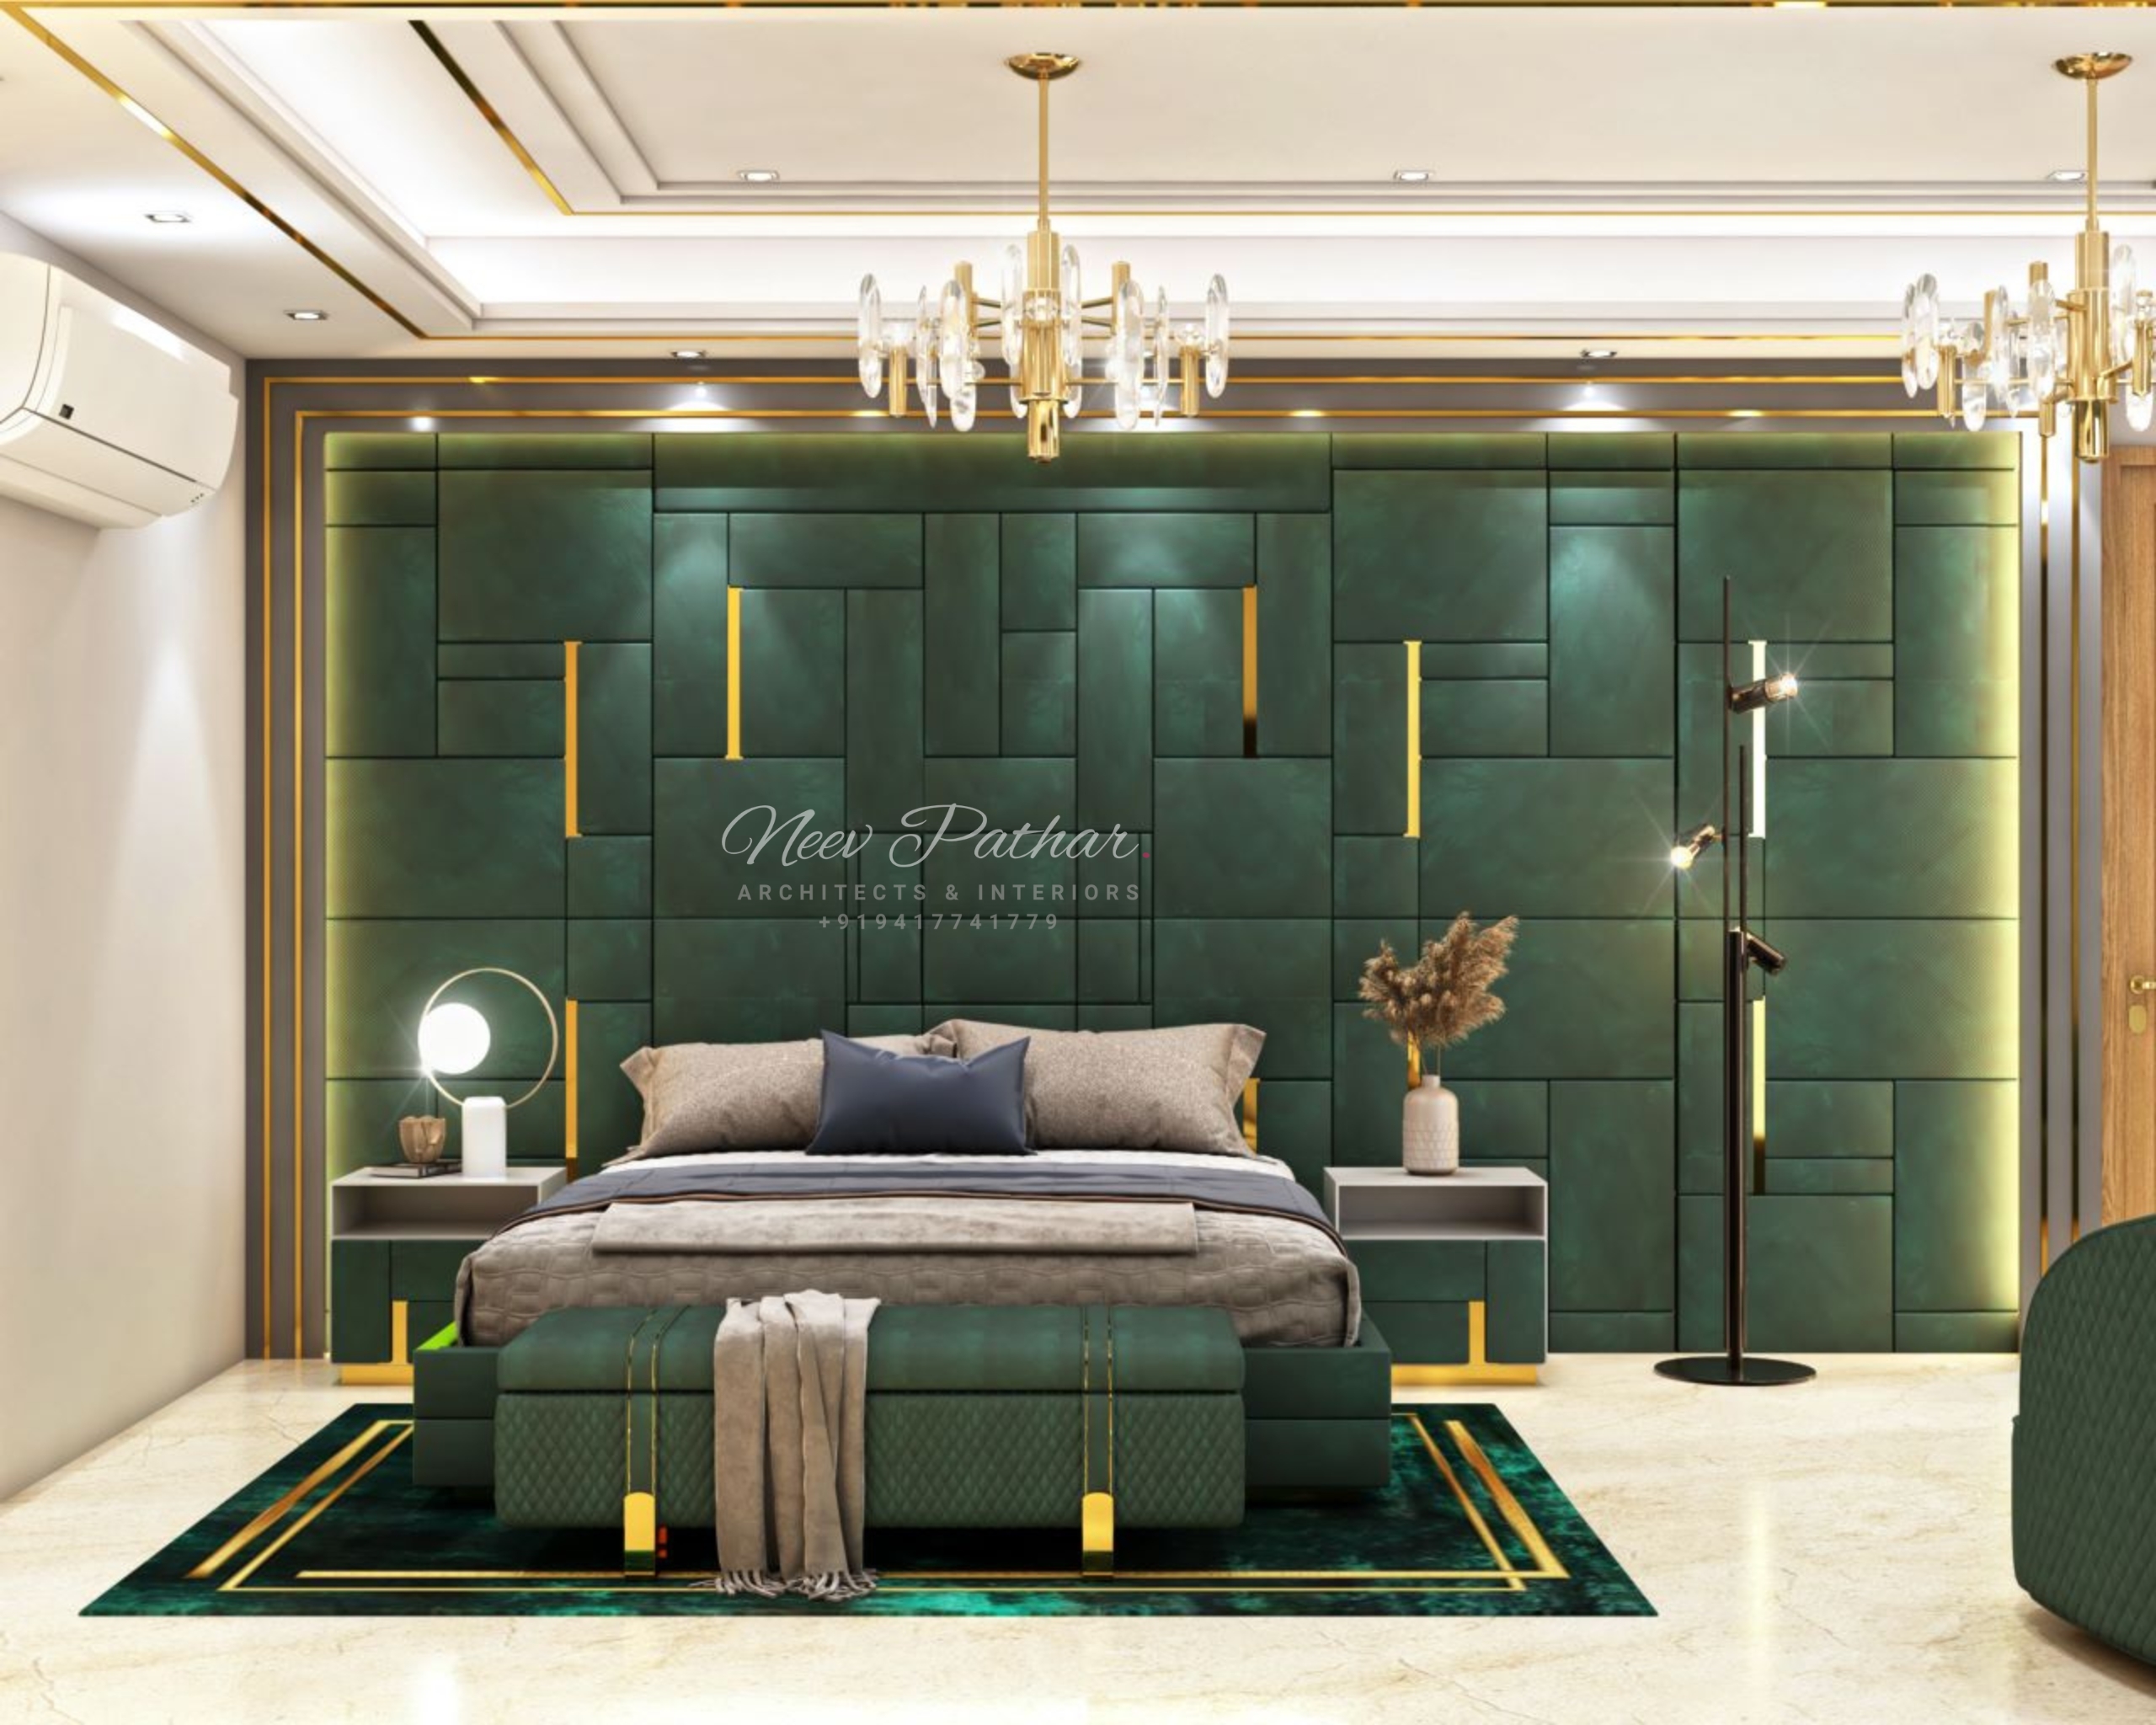 A stunning luxury bedroom designed by architects and interior designers in Ludhiana. The elegant bedroom design features a harmonious blend of comfort and style, creating a serene and inviting atmosphere.